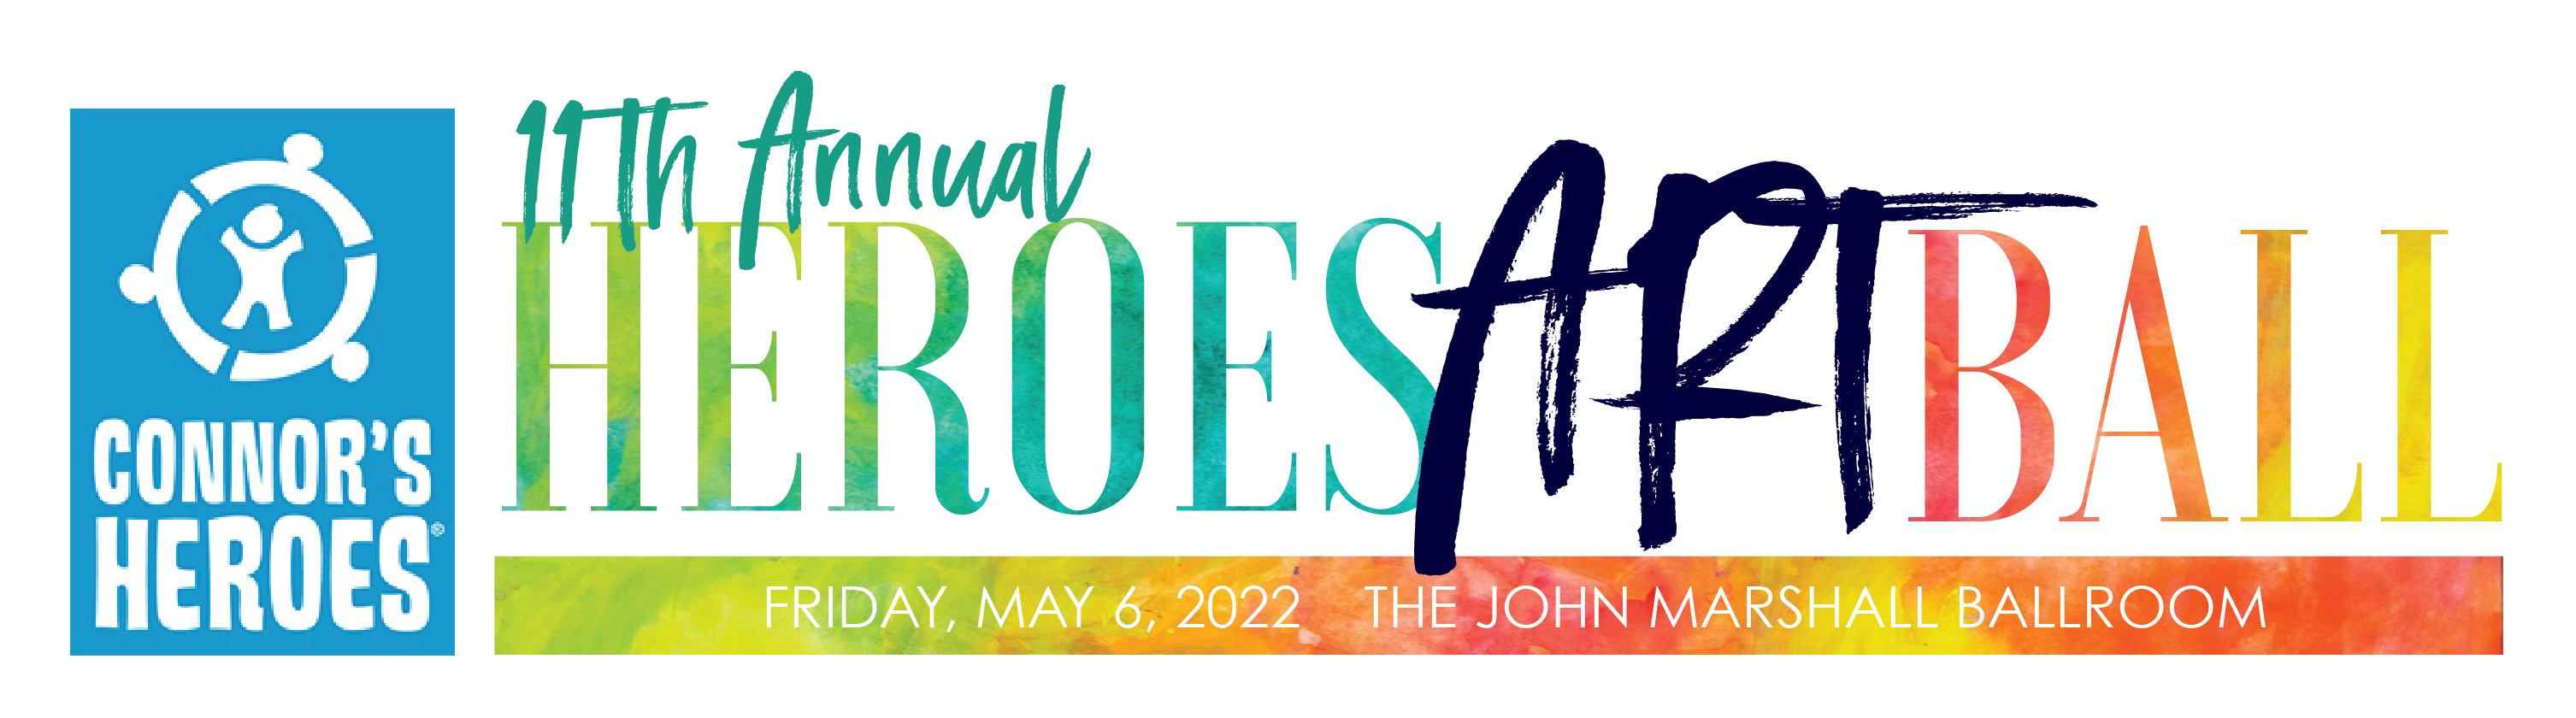 Connors Heroes logo 11th Annual Heroes Art Ball Friday May 6 2022 link to website